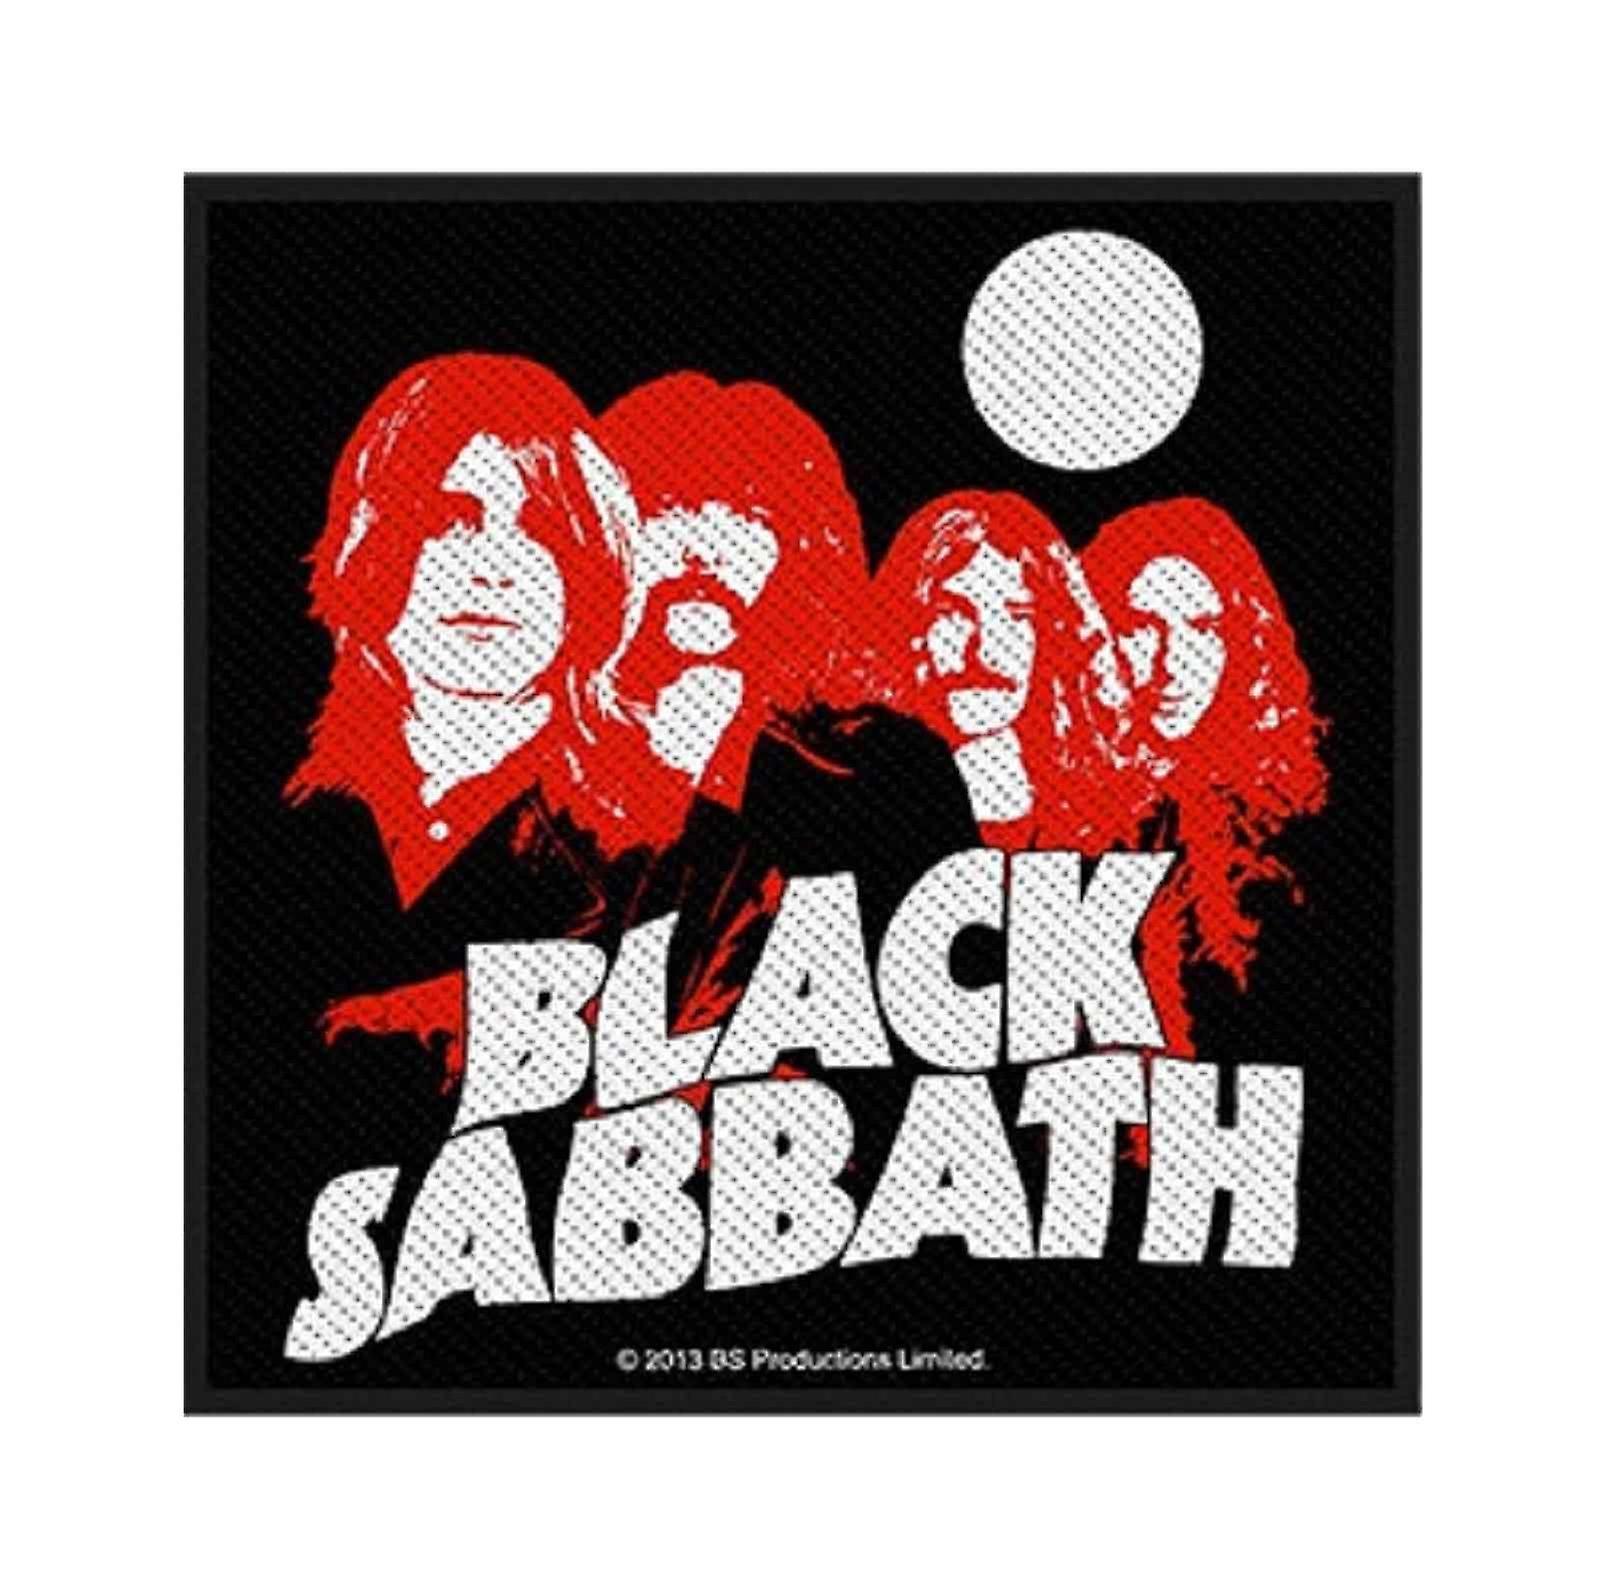 Black and Red Band Logo - Black Sabbath Patch band logo Red Portraits Official woven 10cm x